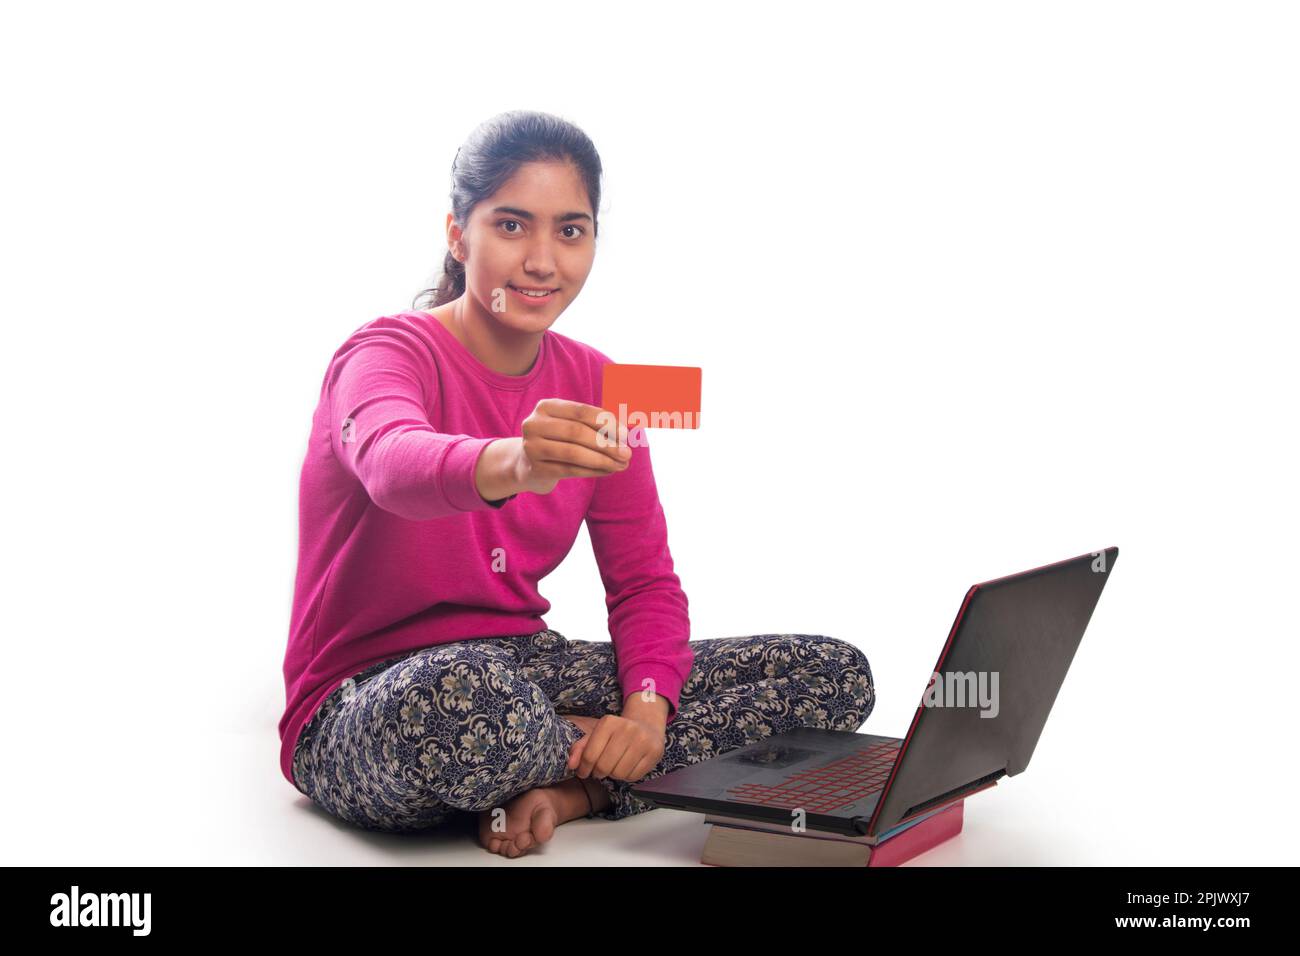 Young college student shopping online and showing credit card Stock Photo